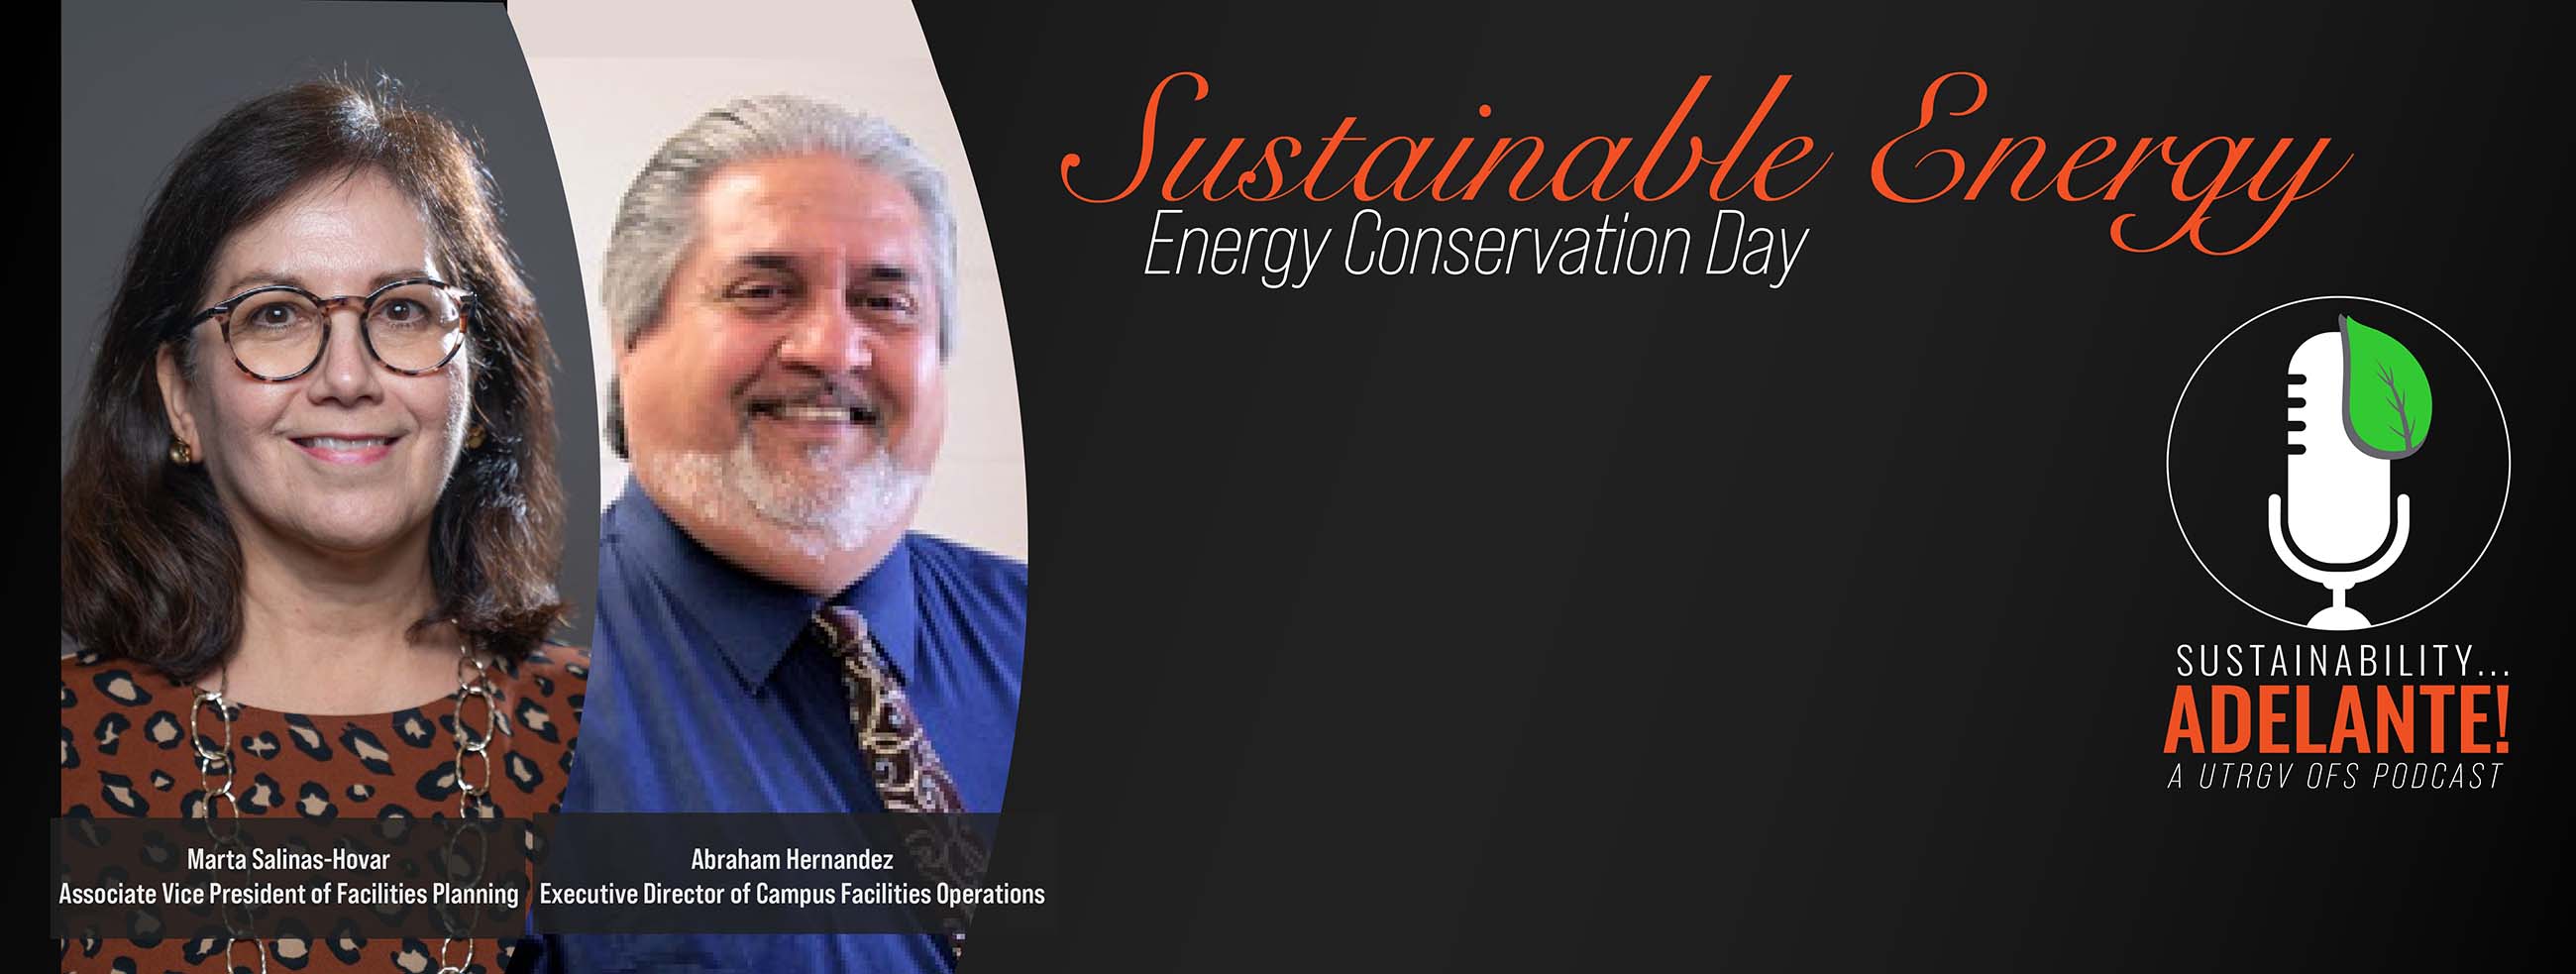 Sustainable Energy. Energy Conservation Day Podcast featuring Marta Salina-Hovar an Associate Vice President of Facilities Planning and Abraham Hernandez an Executive Director of Campus Facilities Operations 